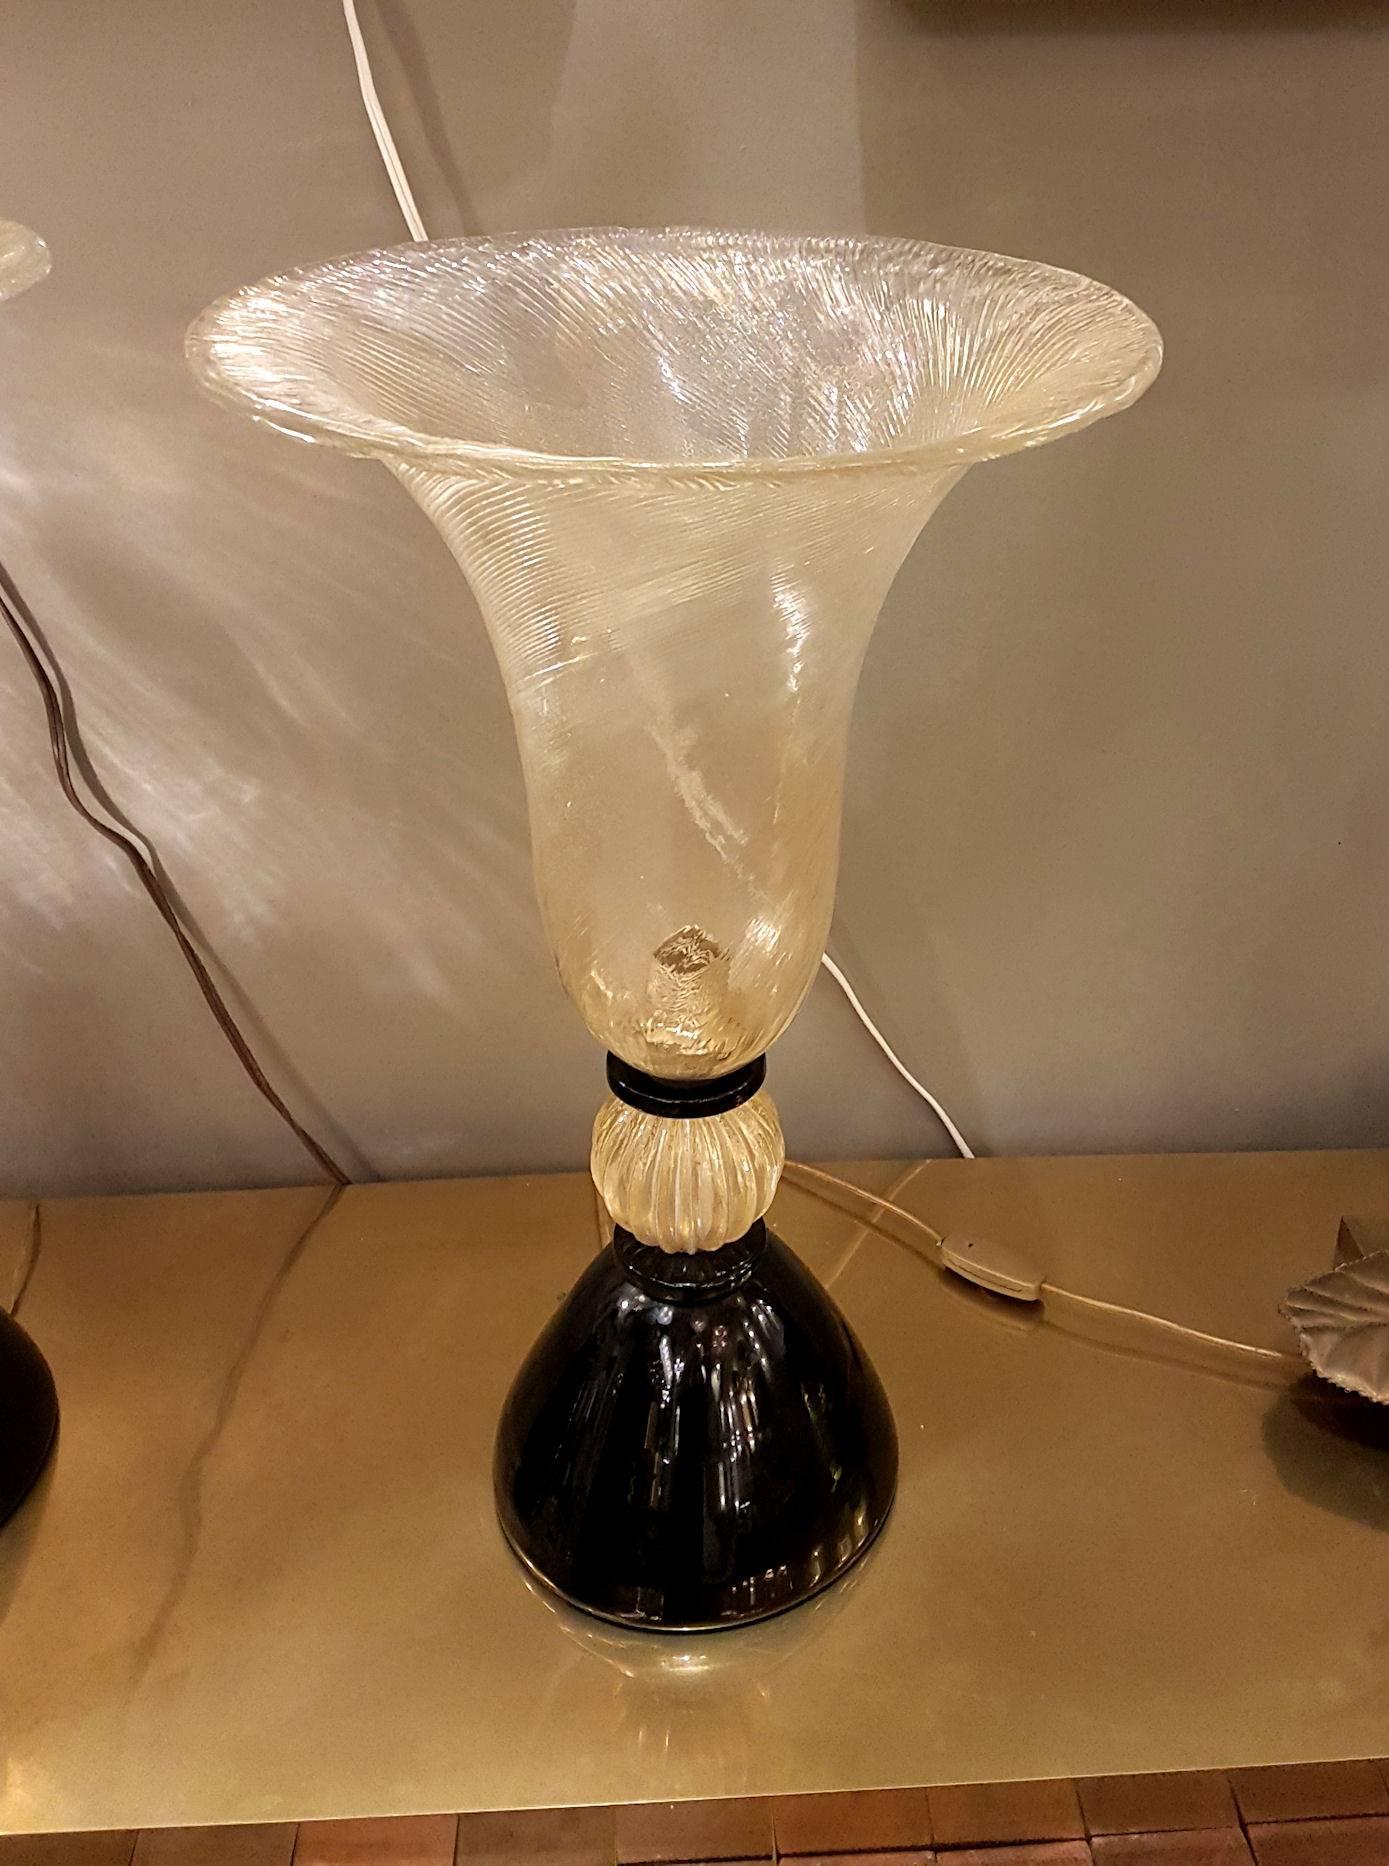 Large pair of Mid-Century Modern Murano glass urn shaped lamps, Venini style and quality.
Made of a black opaque Murano glass base, and a large clear with gold inclusions top vase, containing the light, and decorated with the Rigadin Murano glass